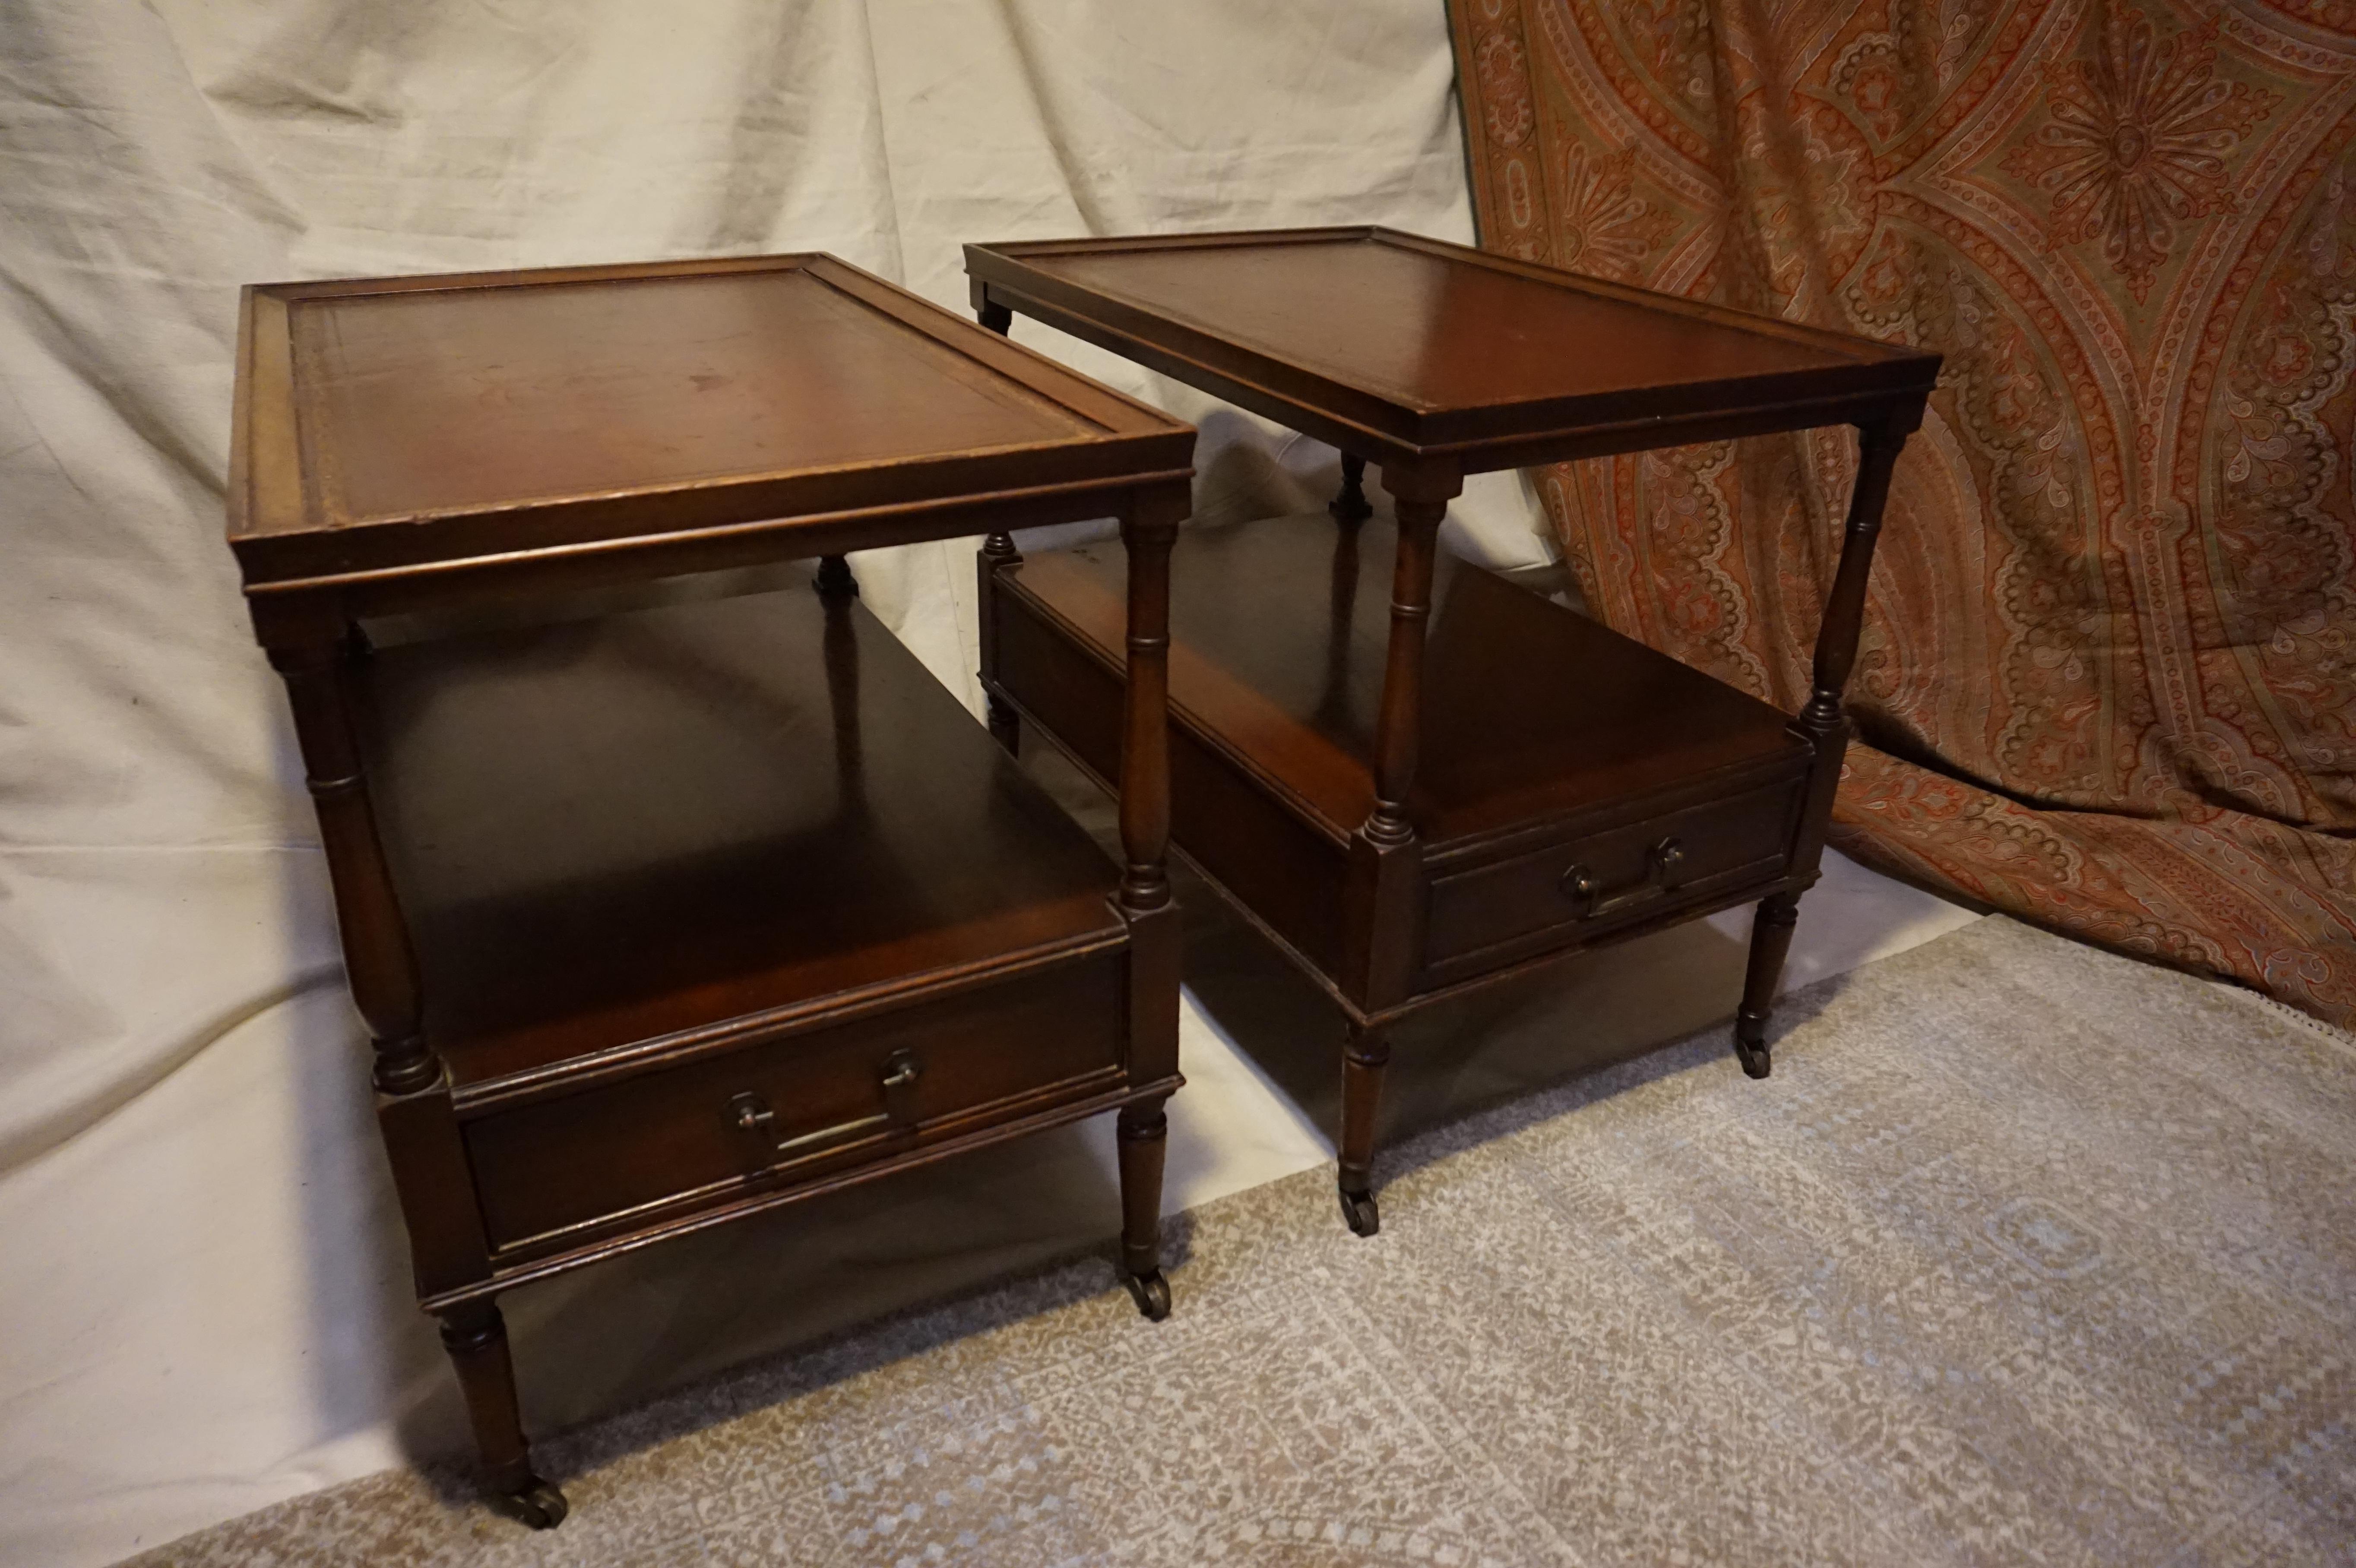 American Colonial Antique Colonial Style Mahogany Side Tables with Leather Top & Brass Hardware